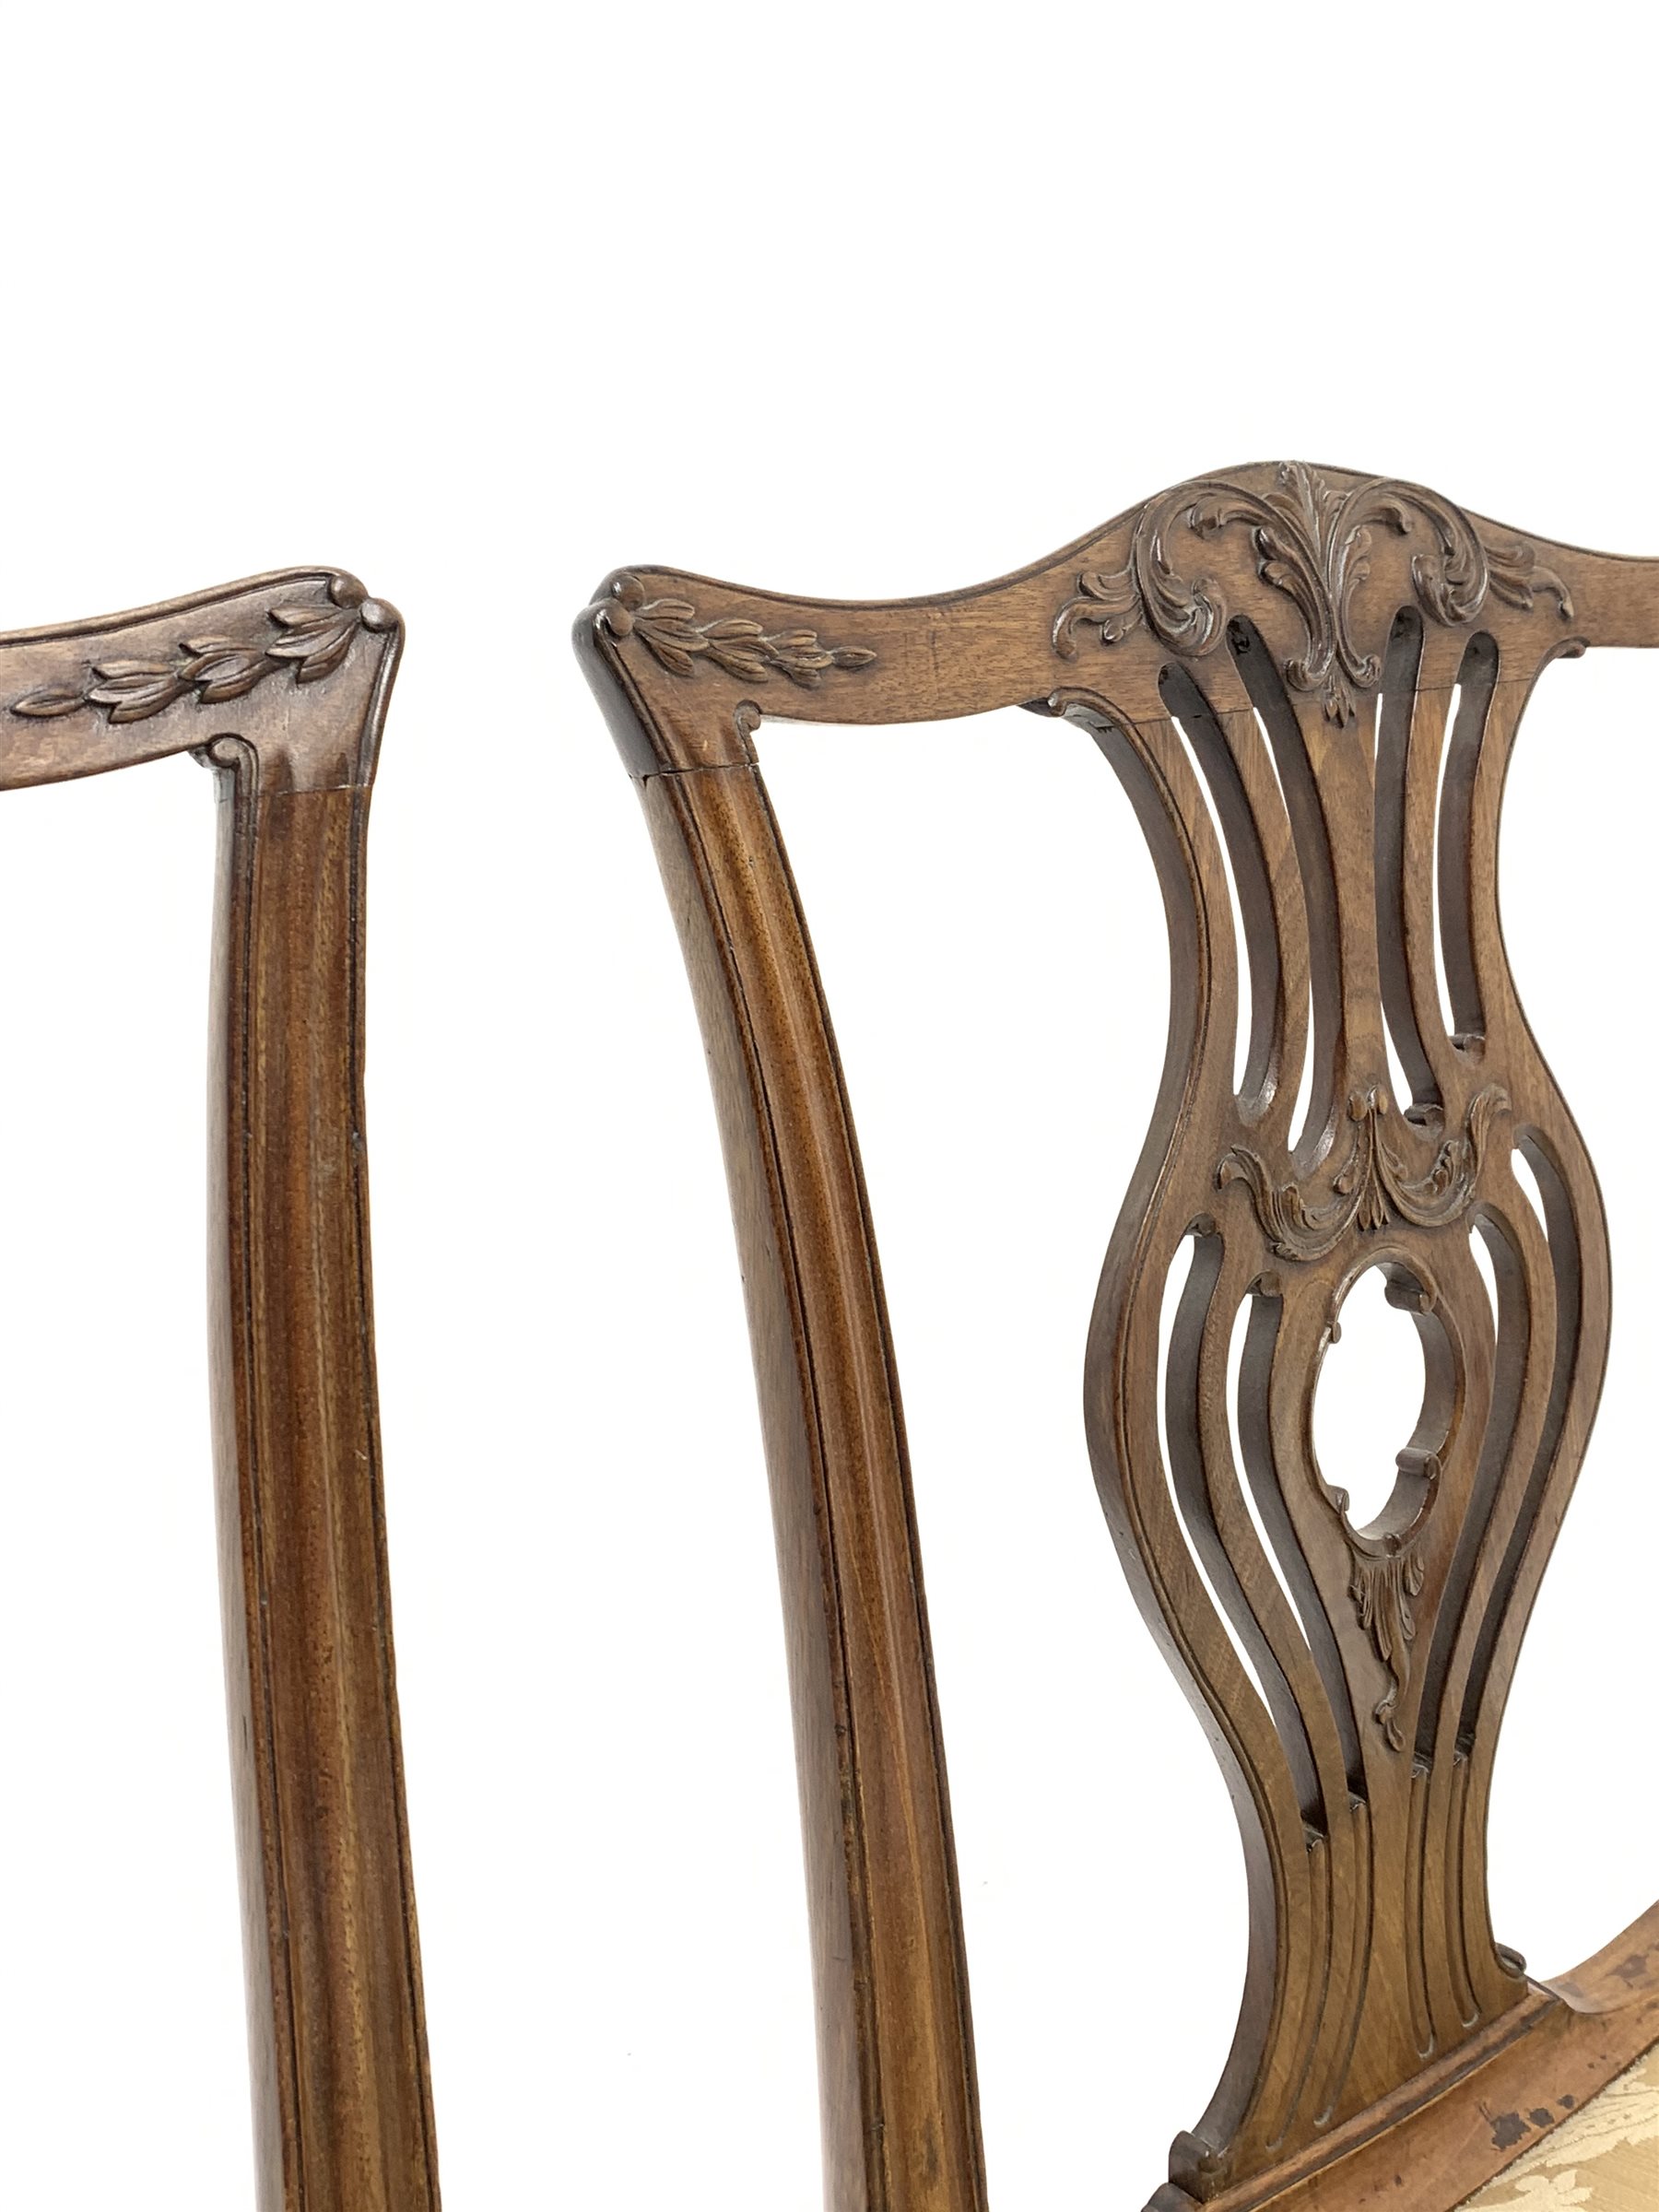 Pair early 19th century Chippendale style chairs, serpentine cresting rail relief carved with scroll - Image 3 of 4